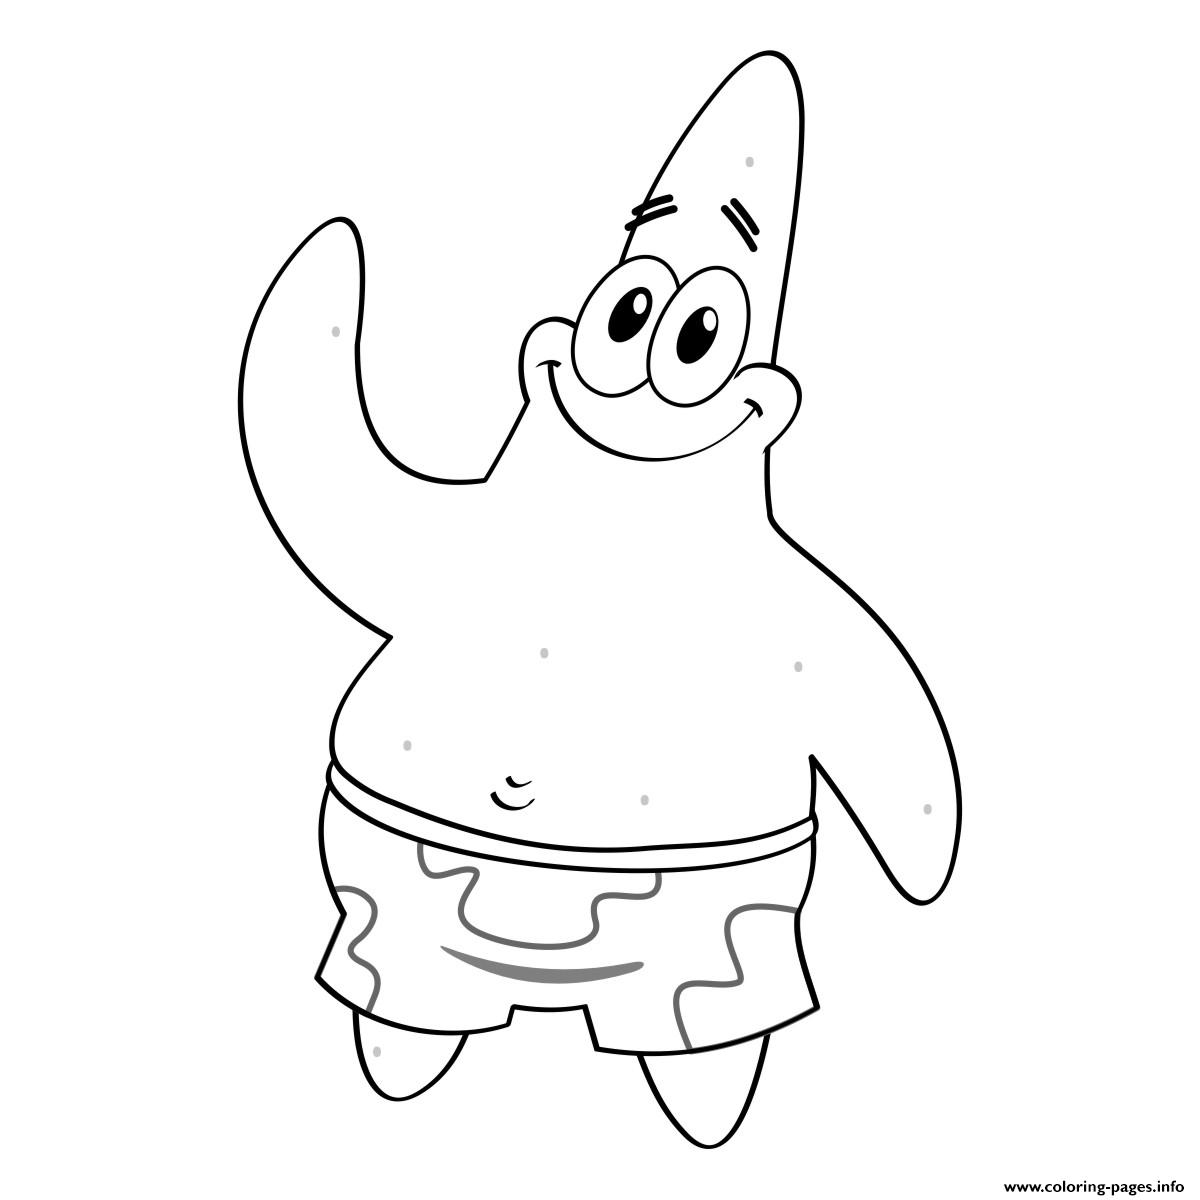 820 Coloring Pages Of Spongebob And Patrick Images & Pictures In HD